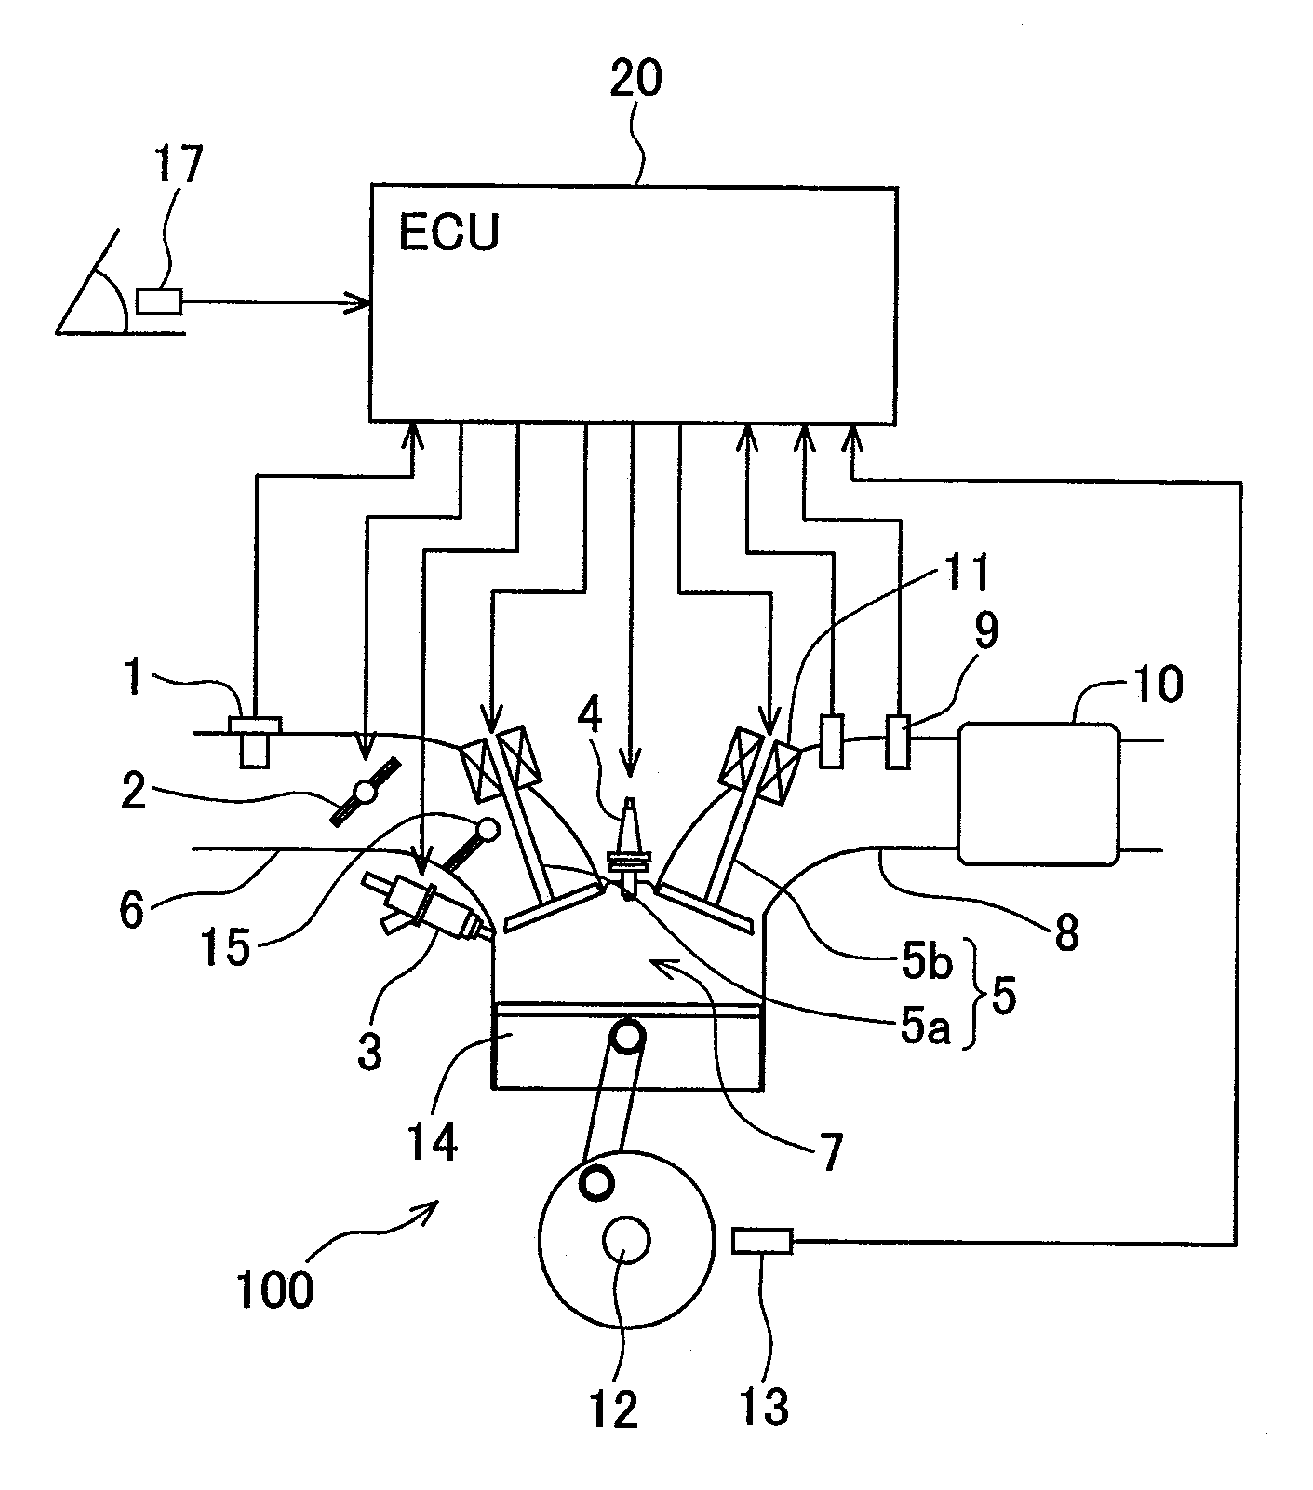 Apparatus and method for controlling a homogeneous charge compression-ignited internal-combustion engine